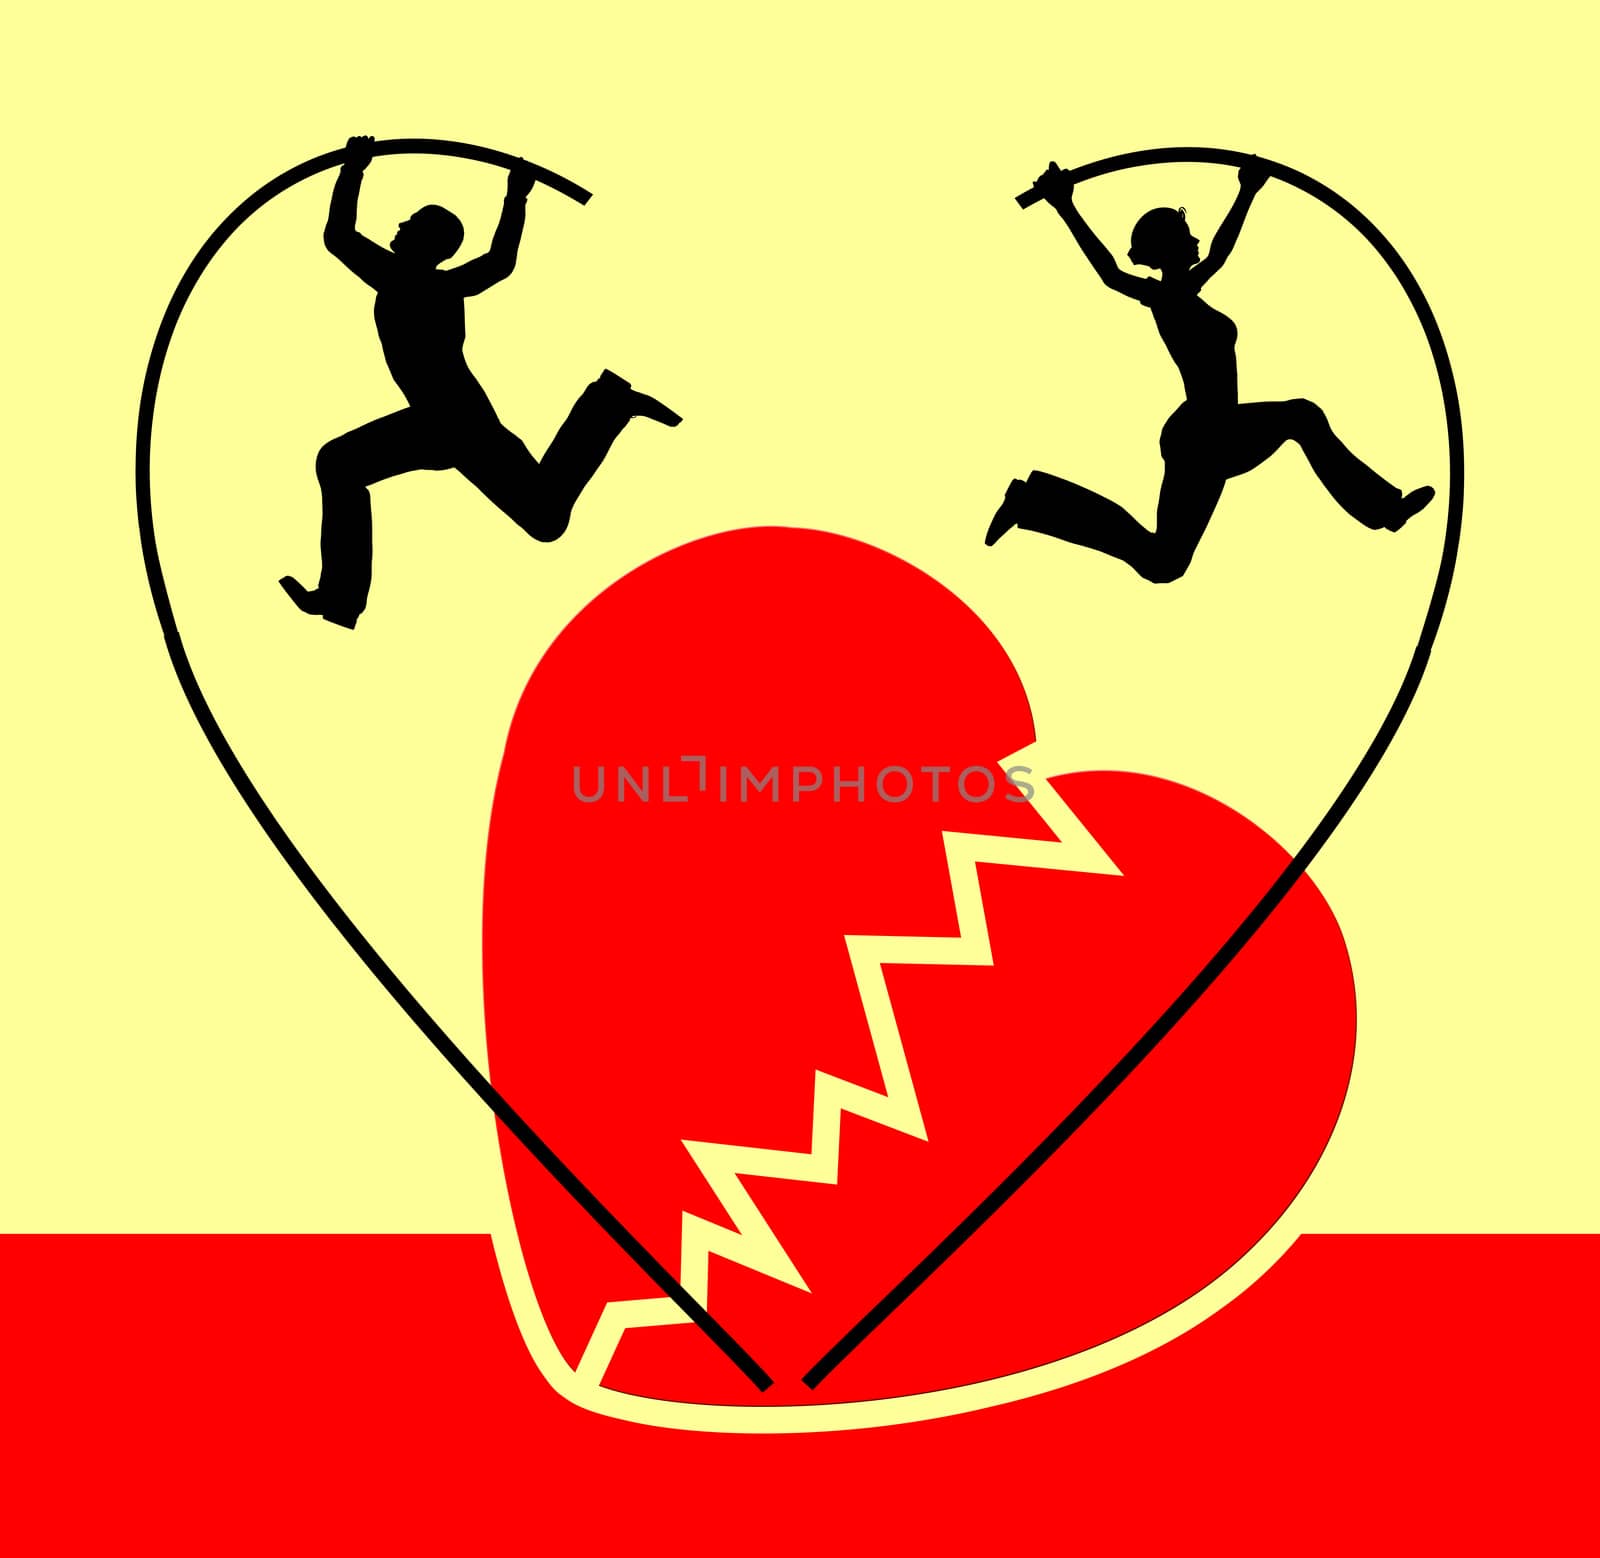 Humorous concept sign of a couple splitting up with the symbol of a broken heart